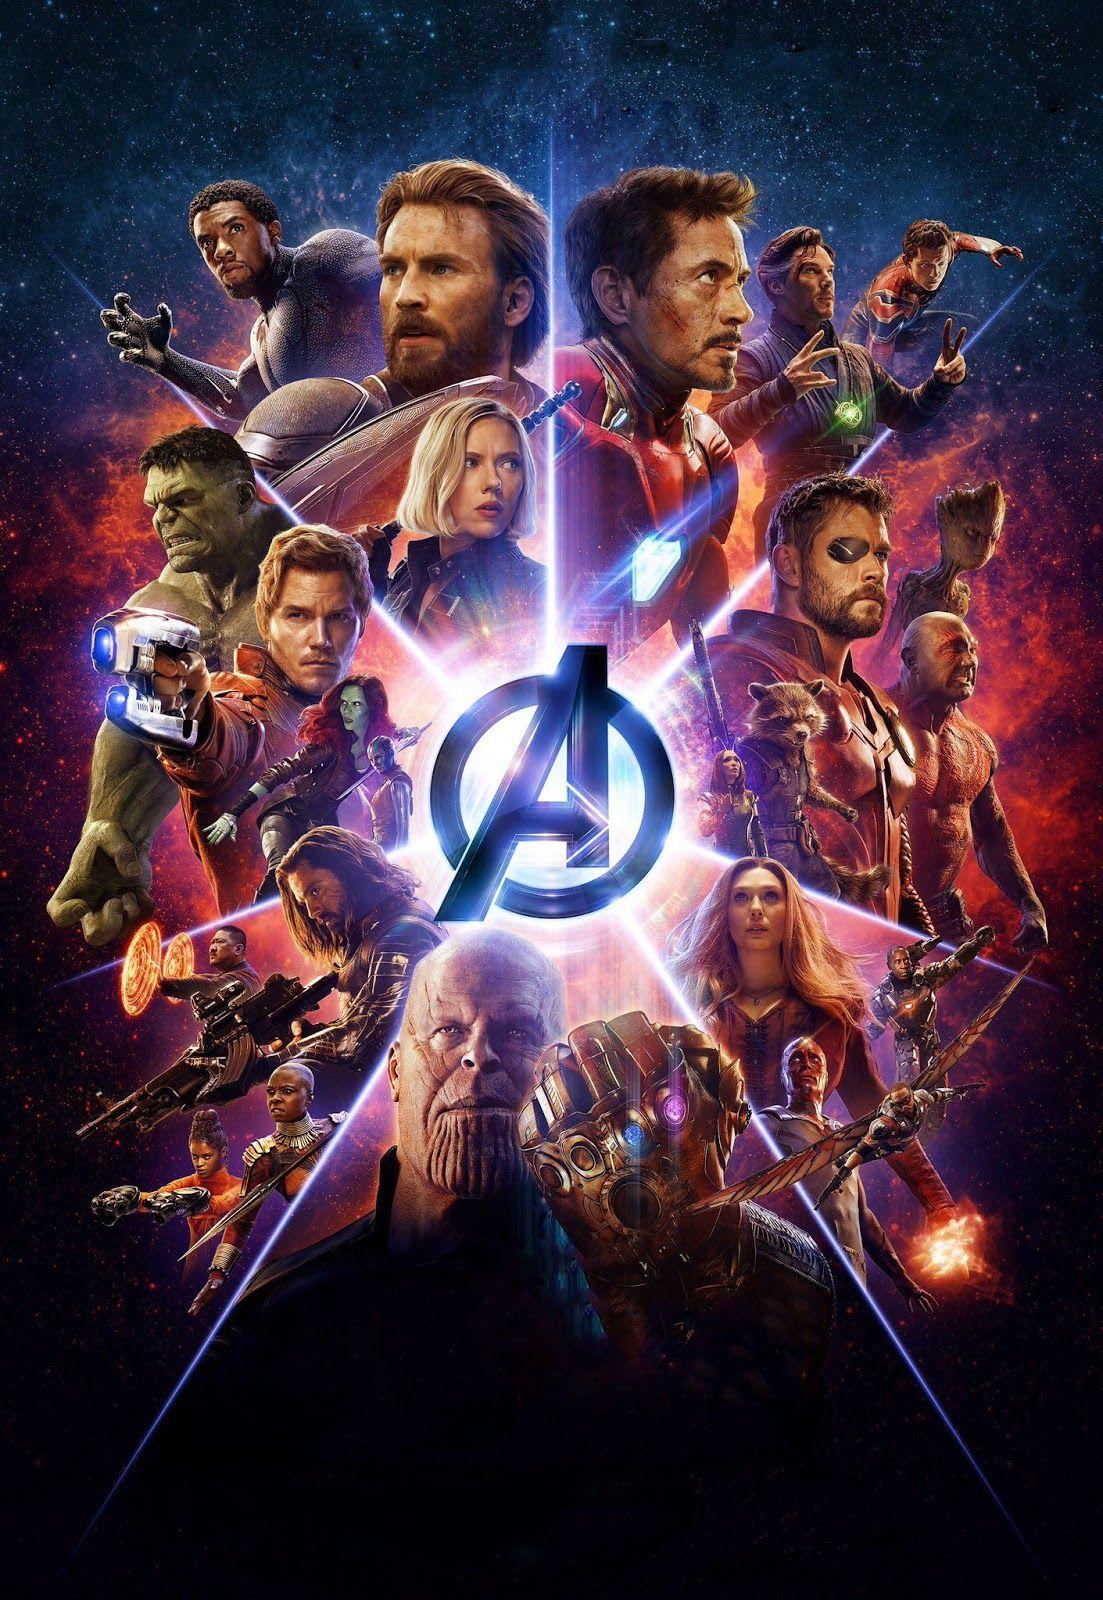 Avengers 4 End Game And Infinity War HD Wallpaper Download In 4K